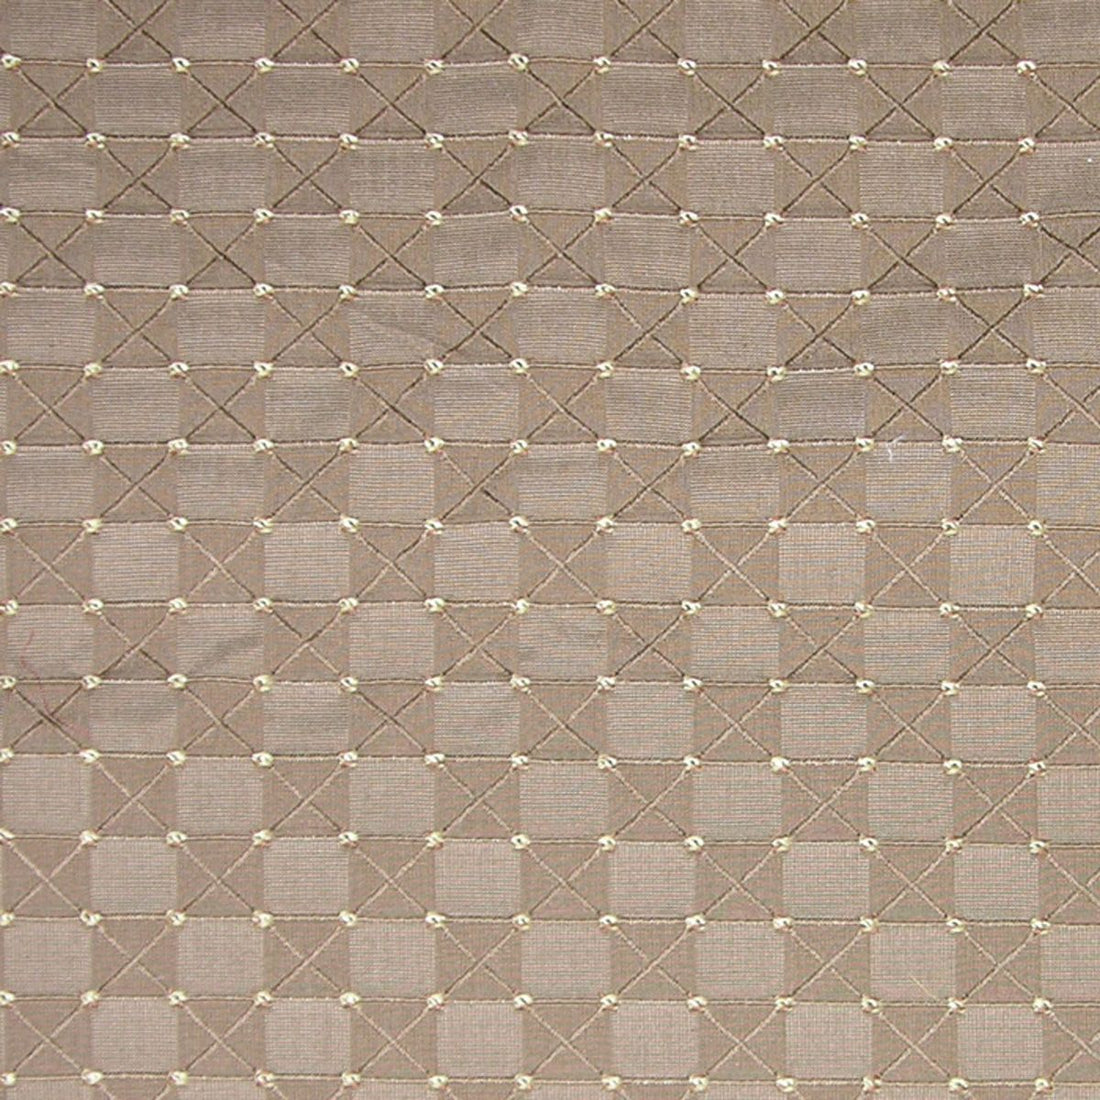 All Square fabric in khaki color - pattern number TI 00072987 - by Scalamandre in the Old World Weavers collection